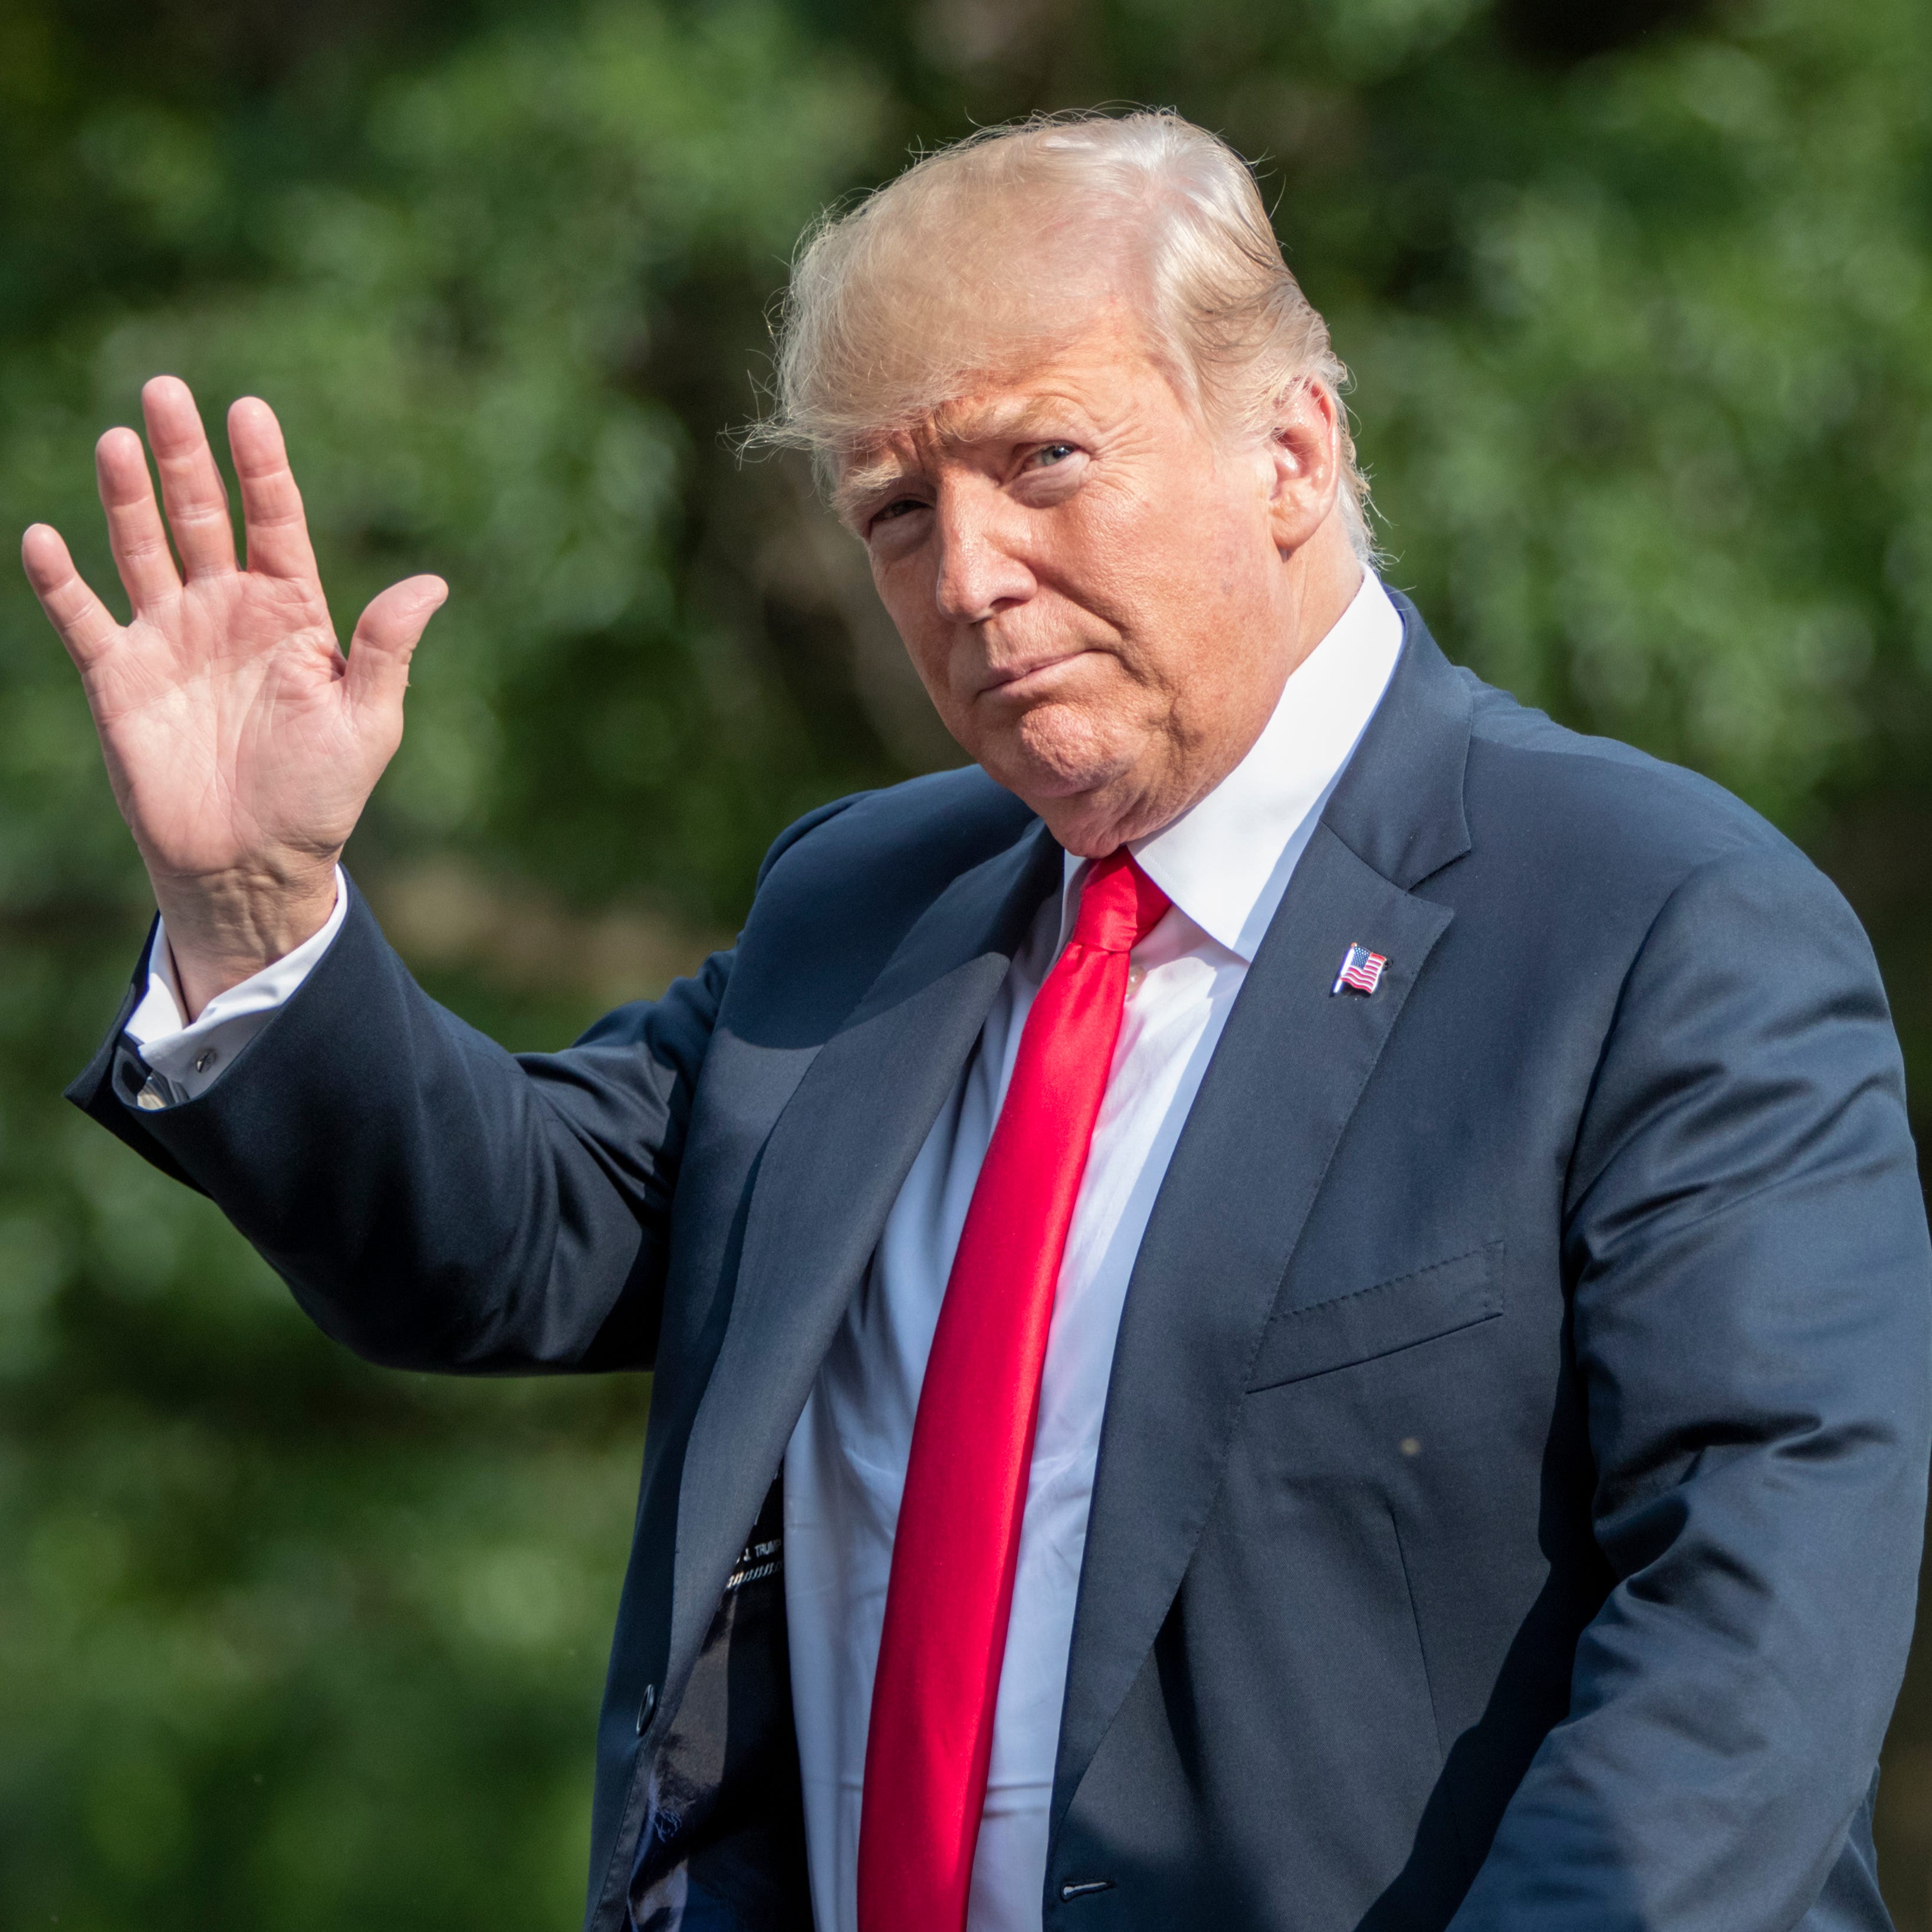 President Donald Trump waves as he arrives at the White House in Washington.